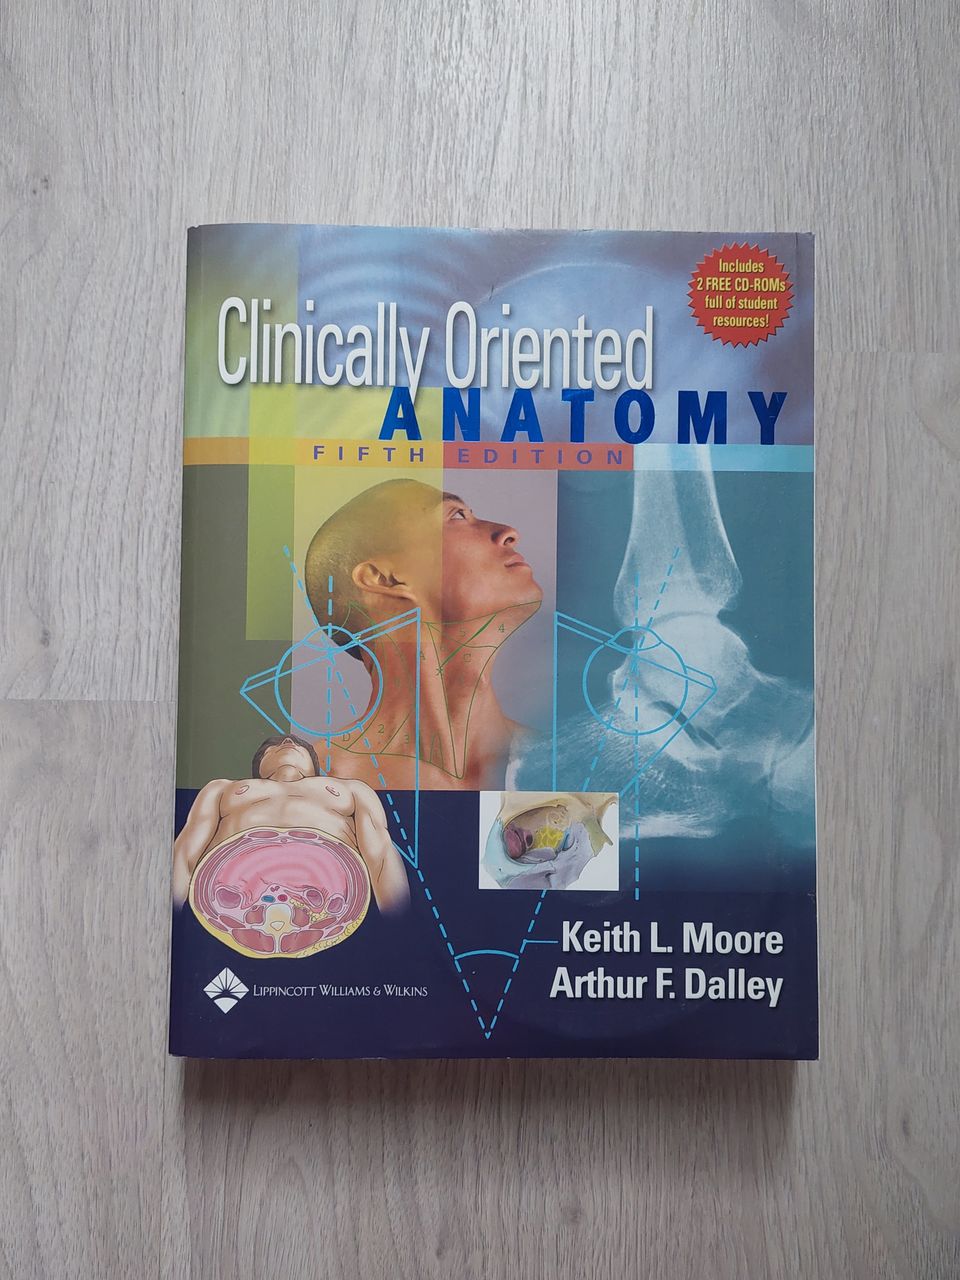 Moore: Clinically Oriented Anatomy, 5th edition